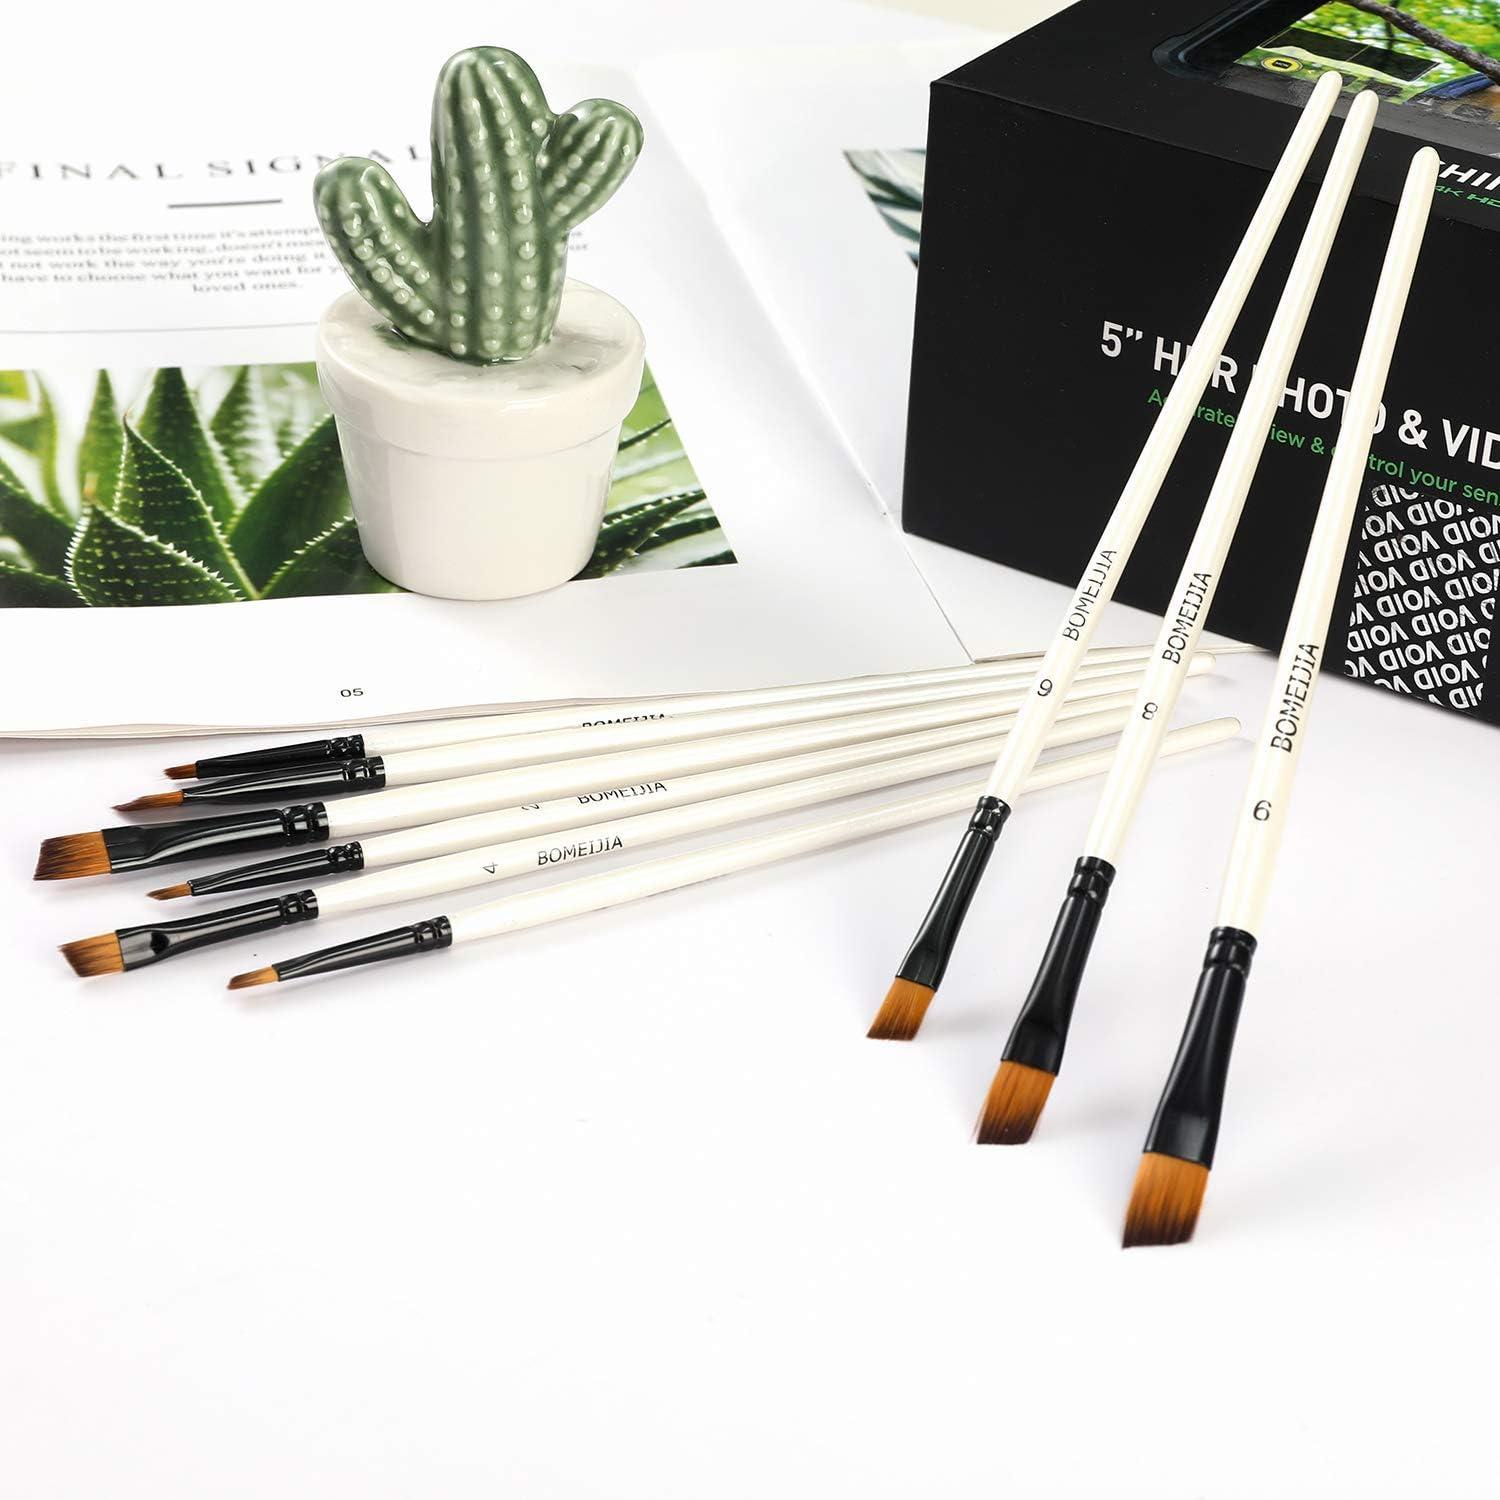 TSV 10 Pcs Paint Brushes Set for Watercolor, Oil, Gouache, Acrylic Painting  Brush with Carrying Case for All Ages - White 